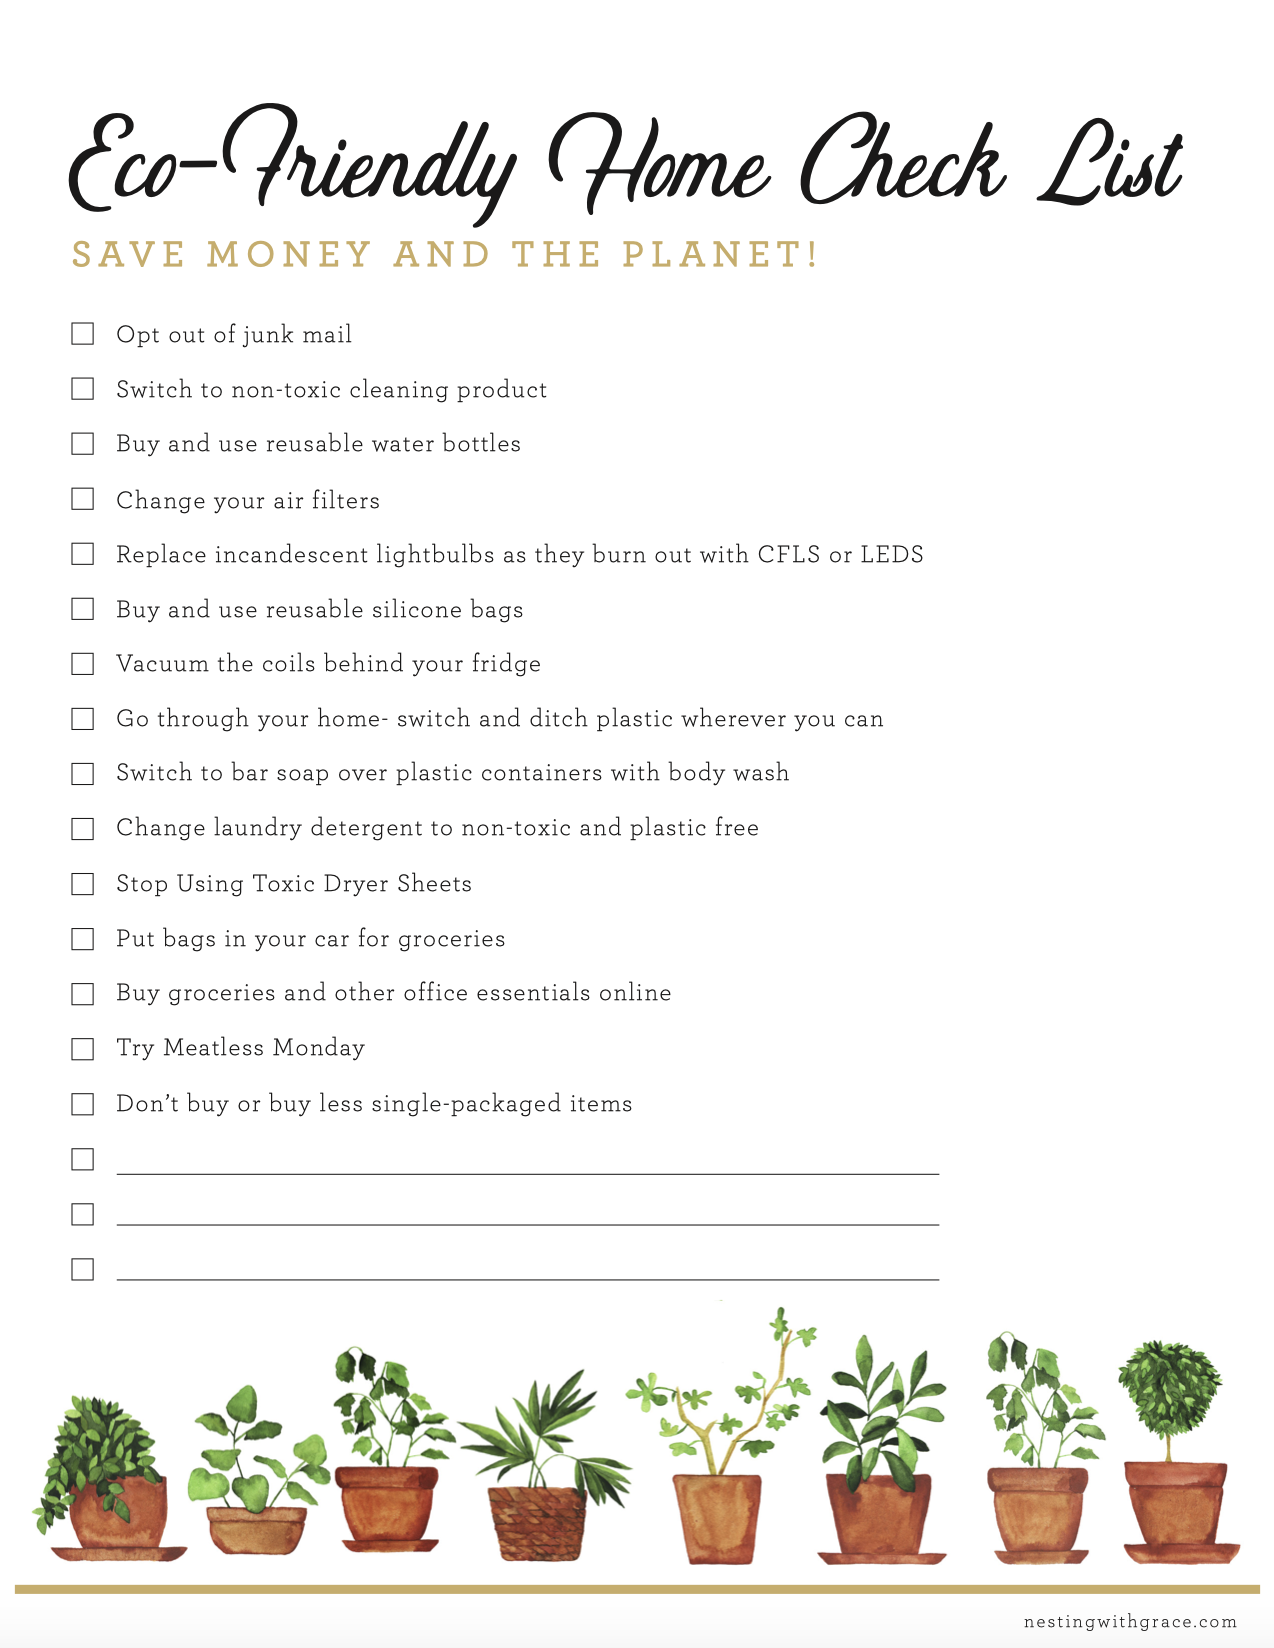 15 Ways to Be Thrifty and Conserve the Planet with Printable!